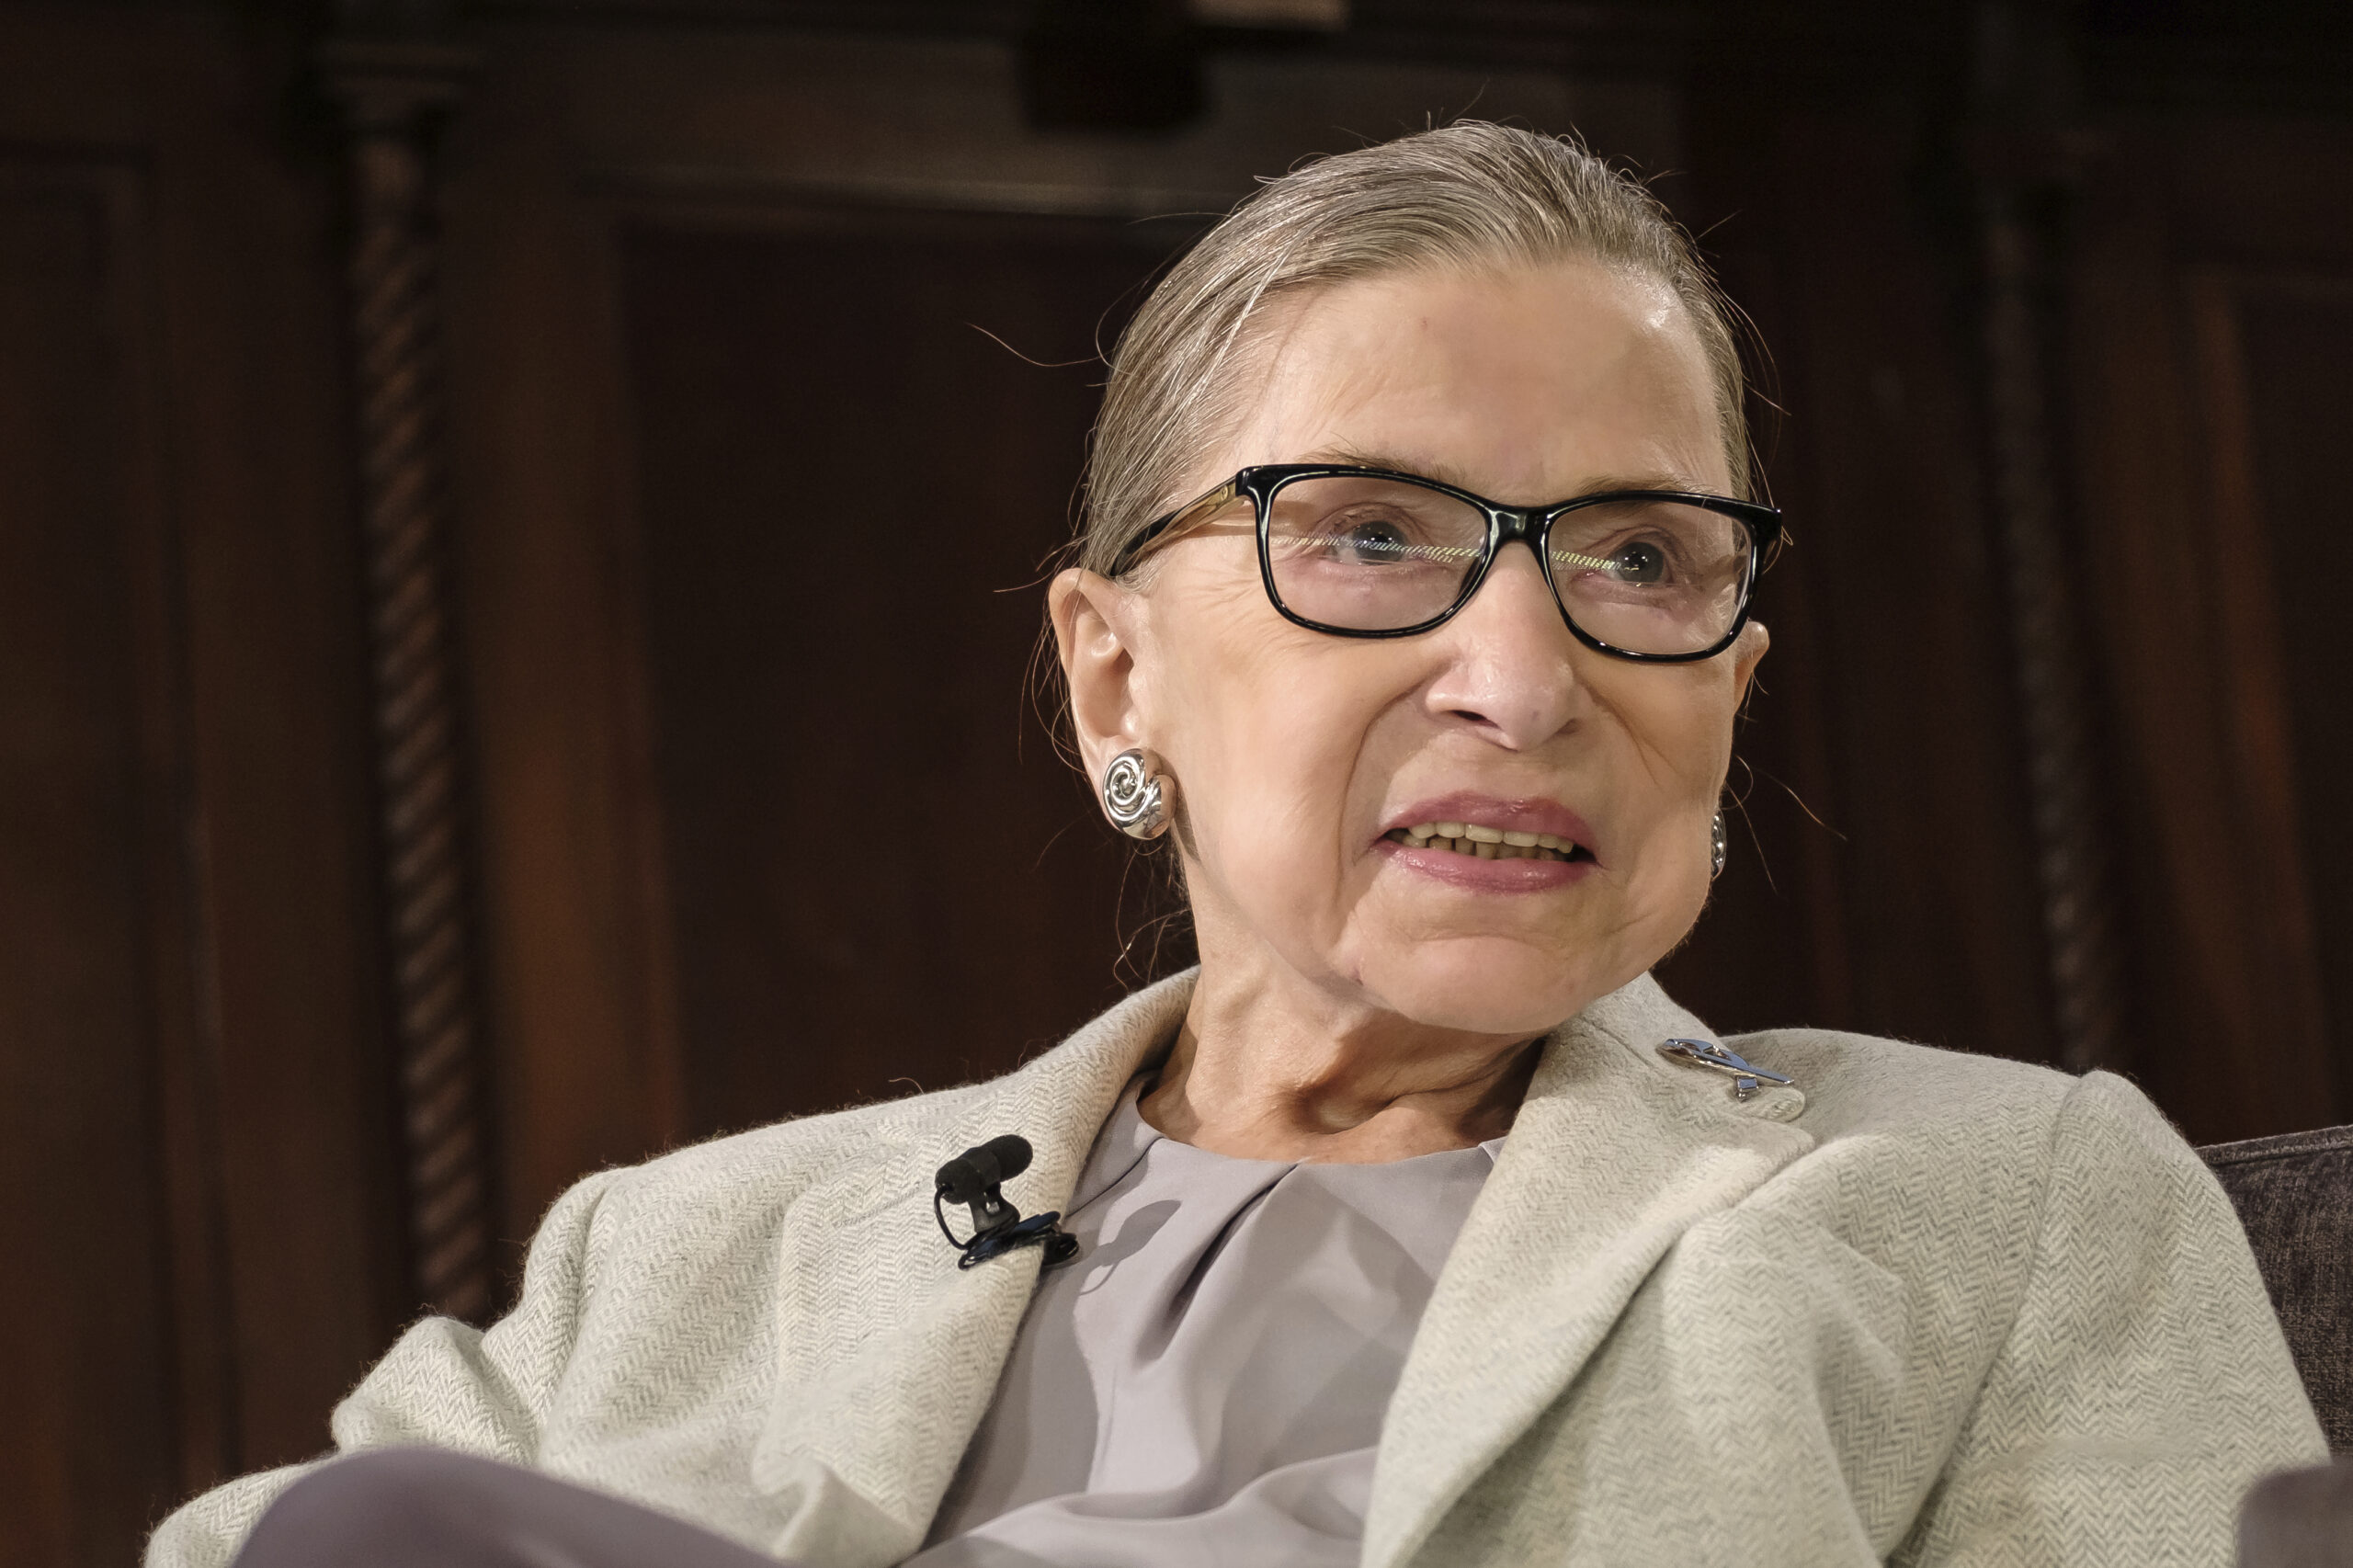 U.S. Supreme Court Associate Justice Ruth Bader Ginsburg in New York, NY, USA on December 15, 2018. (Photo by Albin Lohr-Jones/Sipa USA)(Sipa via AP Images)